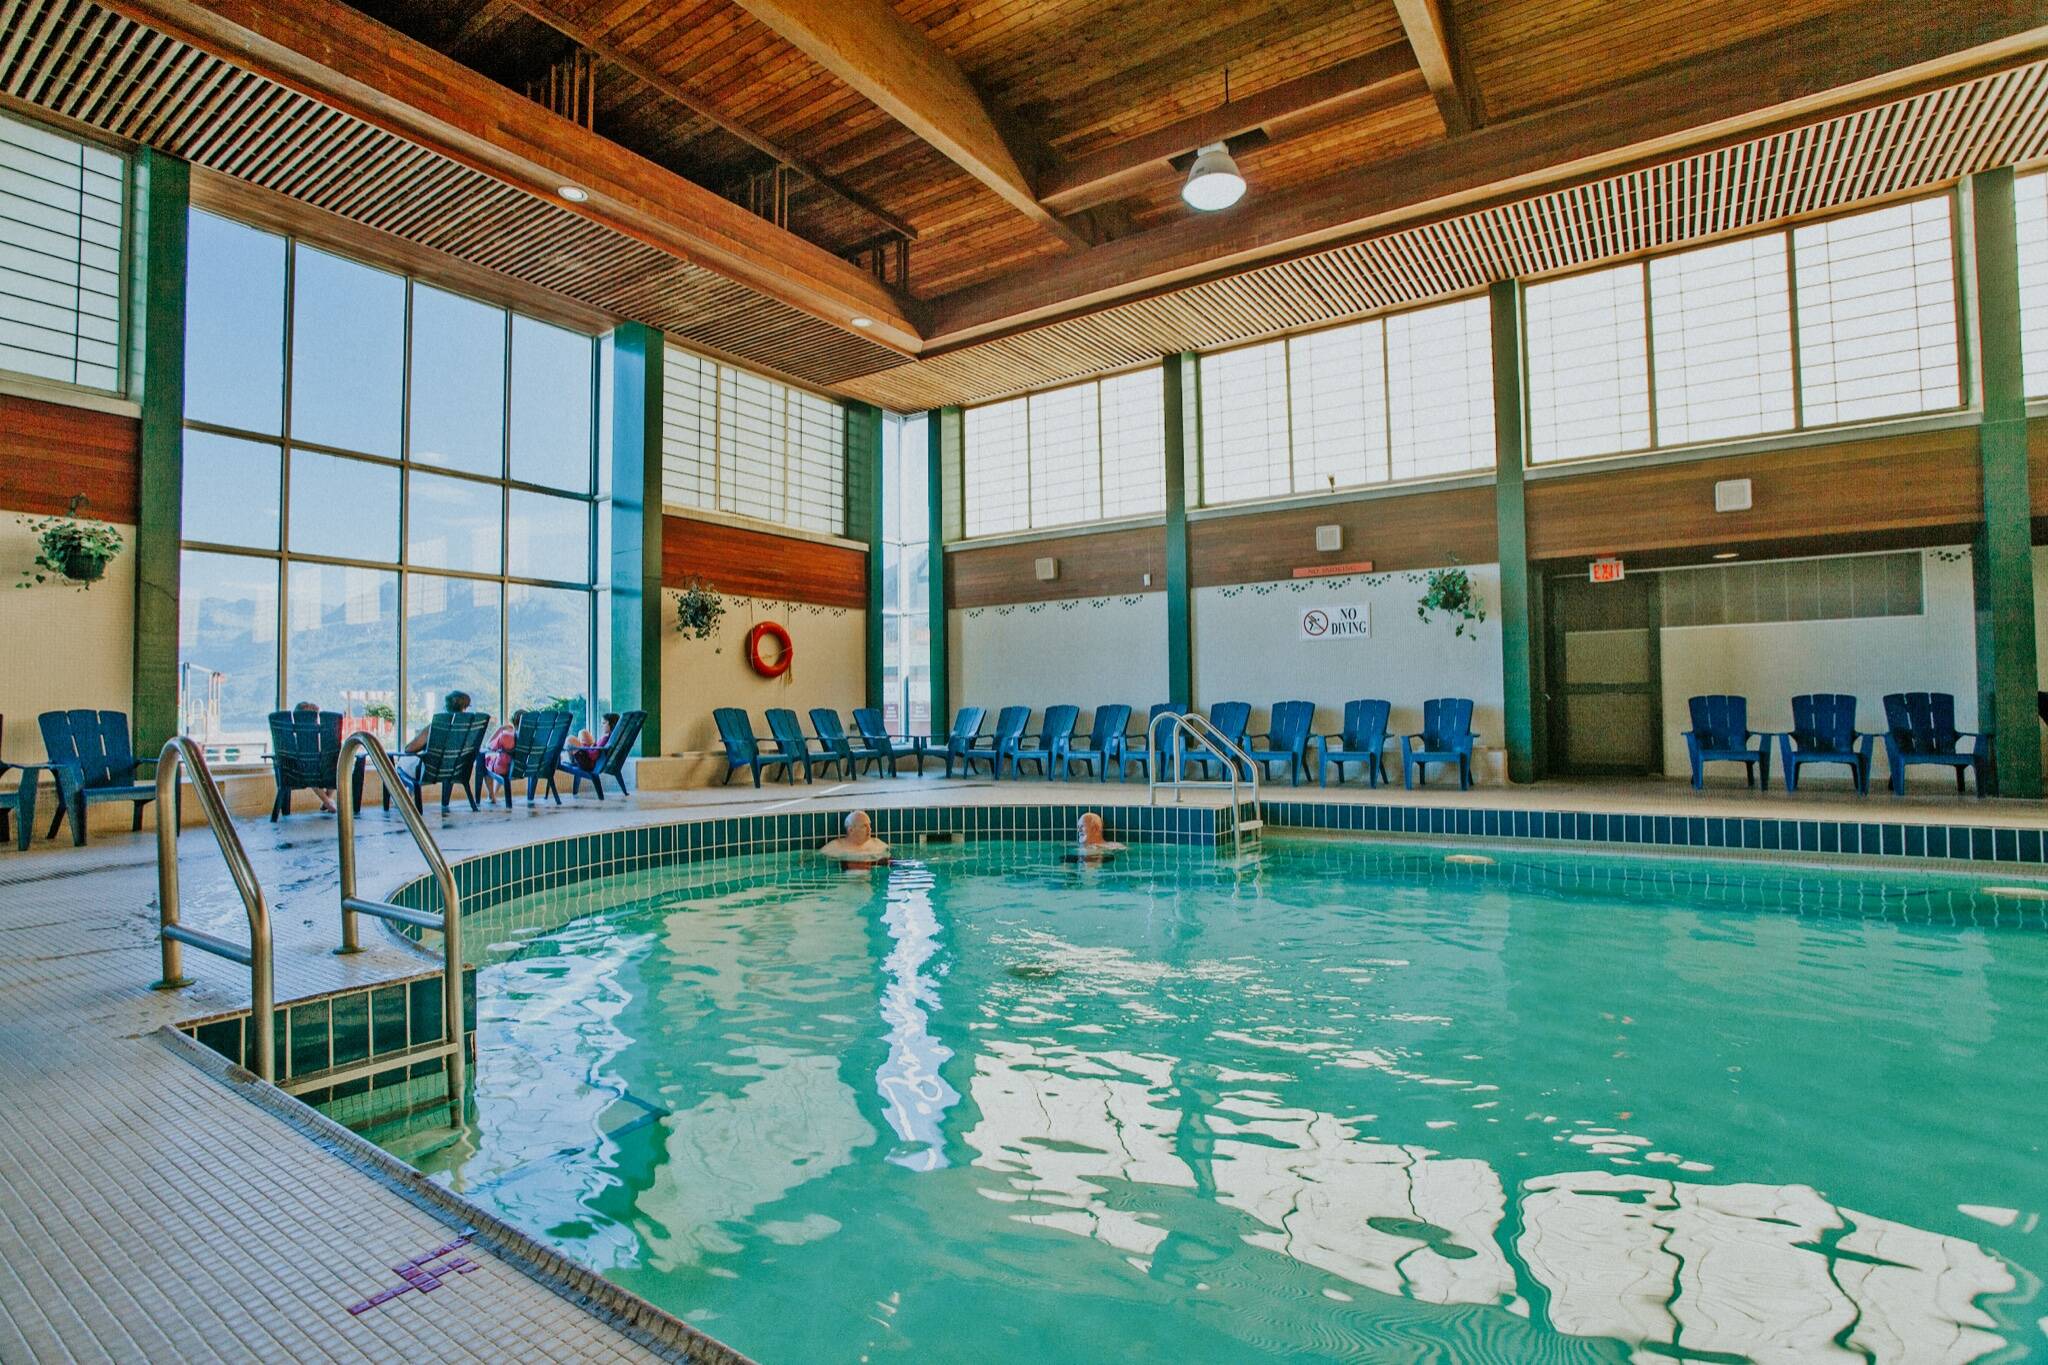 The Harrison Hot Springs Public Mineral Pool is set to re-open for weekends effective May 21. Tourism Harrison indicated hours may expand further in the coming weeks. (Contributed Photo/Tourism Harrison)